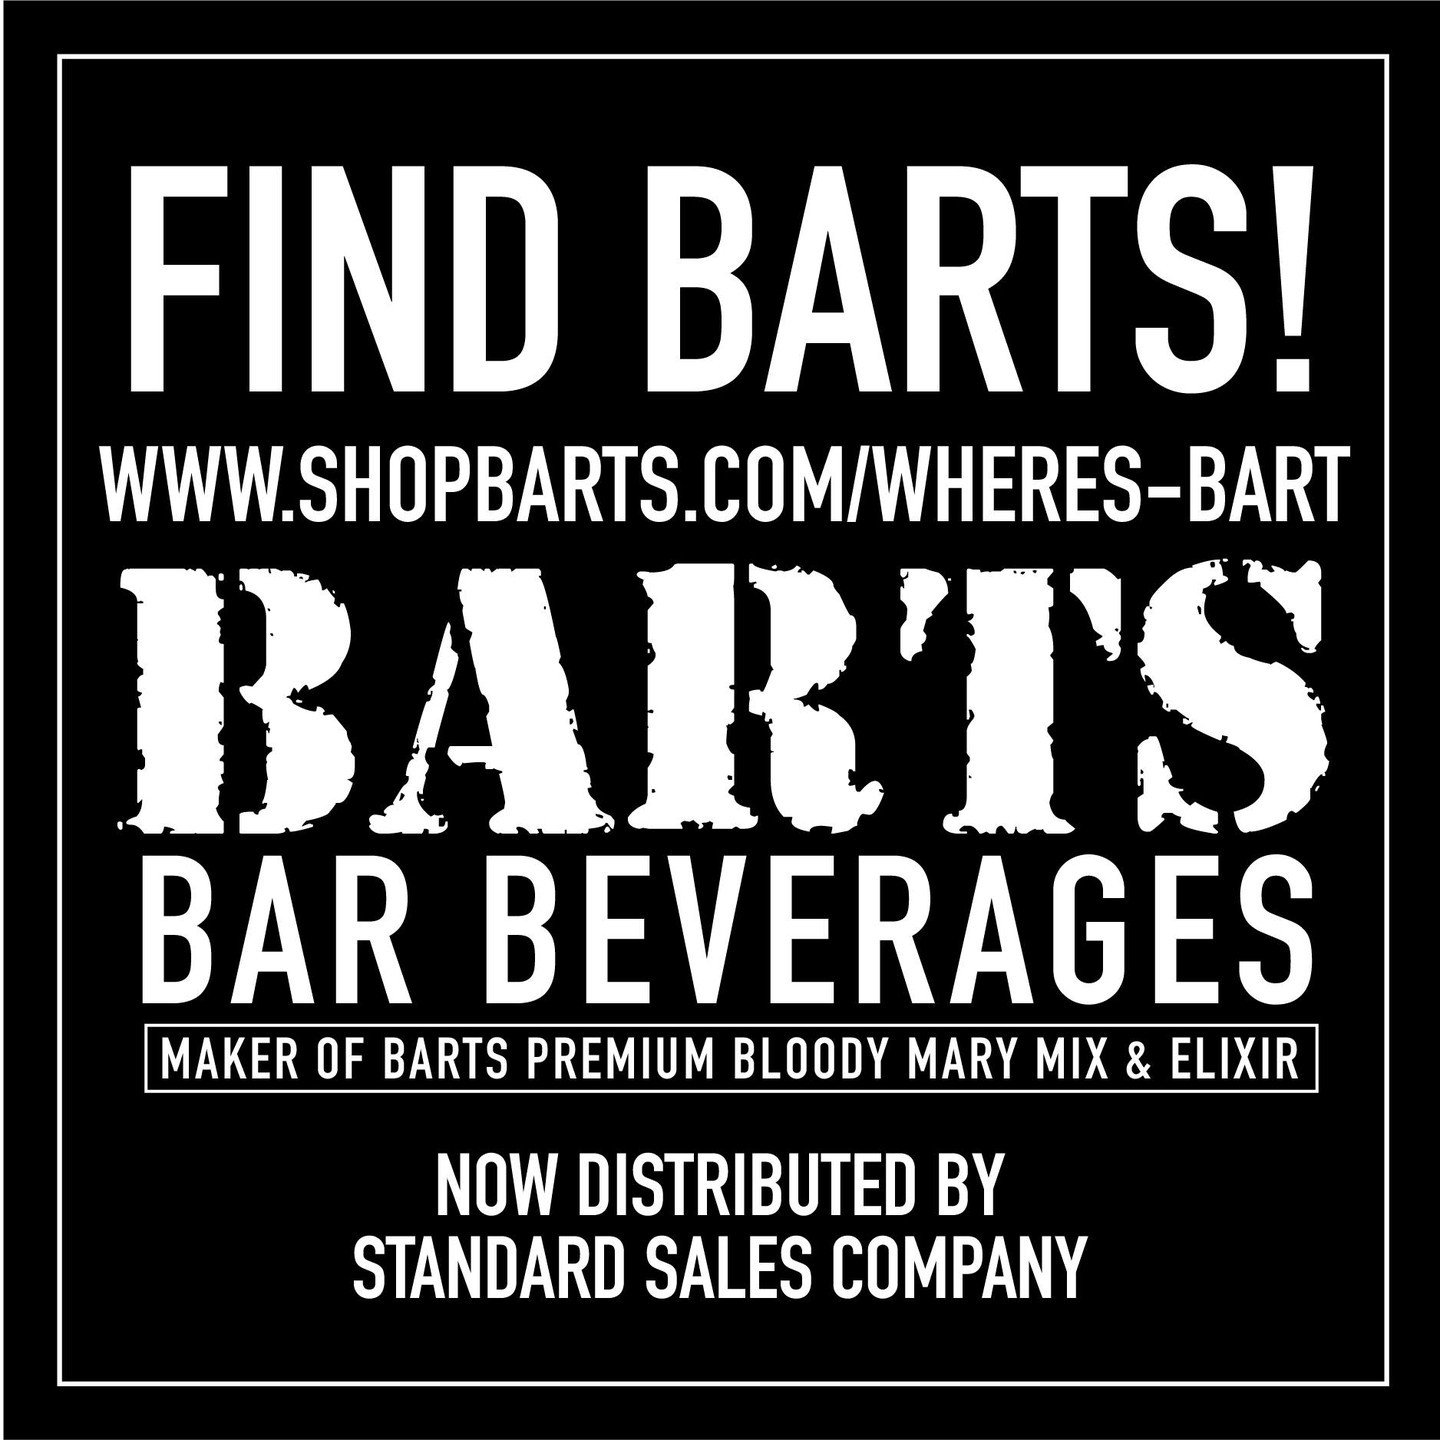 Barts is available in stores! Not everywhere, but we're working on it! Find Barts near you at our link in bio. #bartsbloodymary #betterbebarts #shopsmall #drinklocal #shoplocal #buylocal #shopsmallmidland #midlandtx #midlandia #westtexas #madeintexas